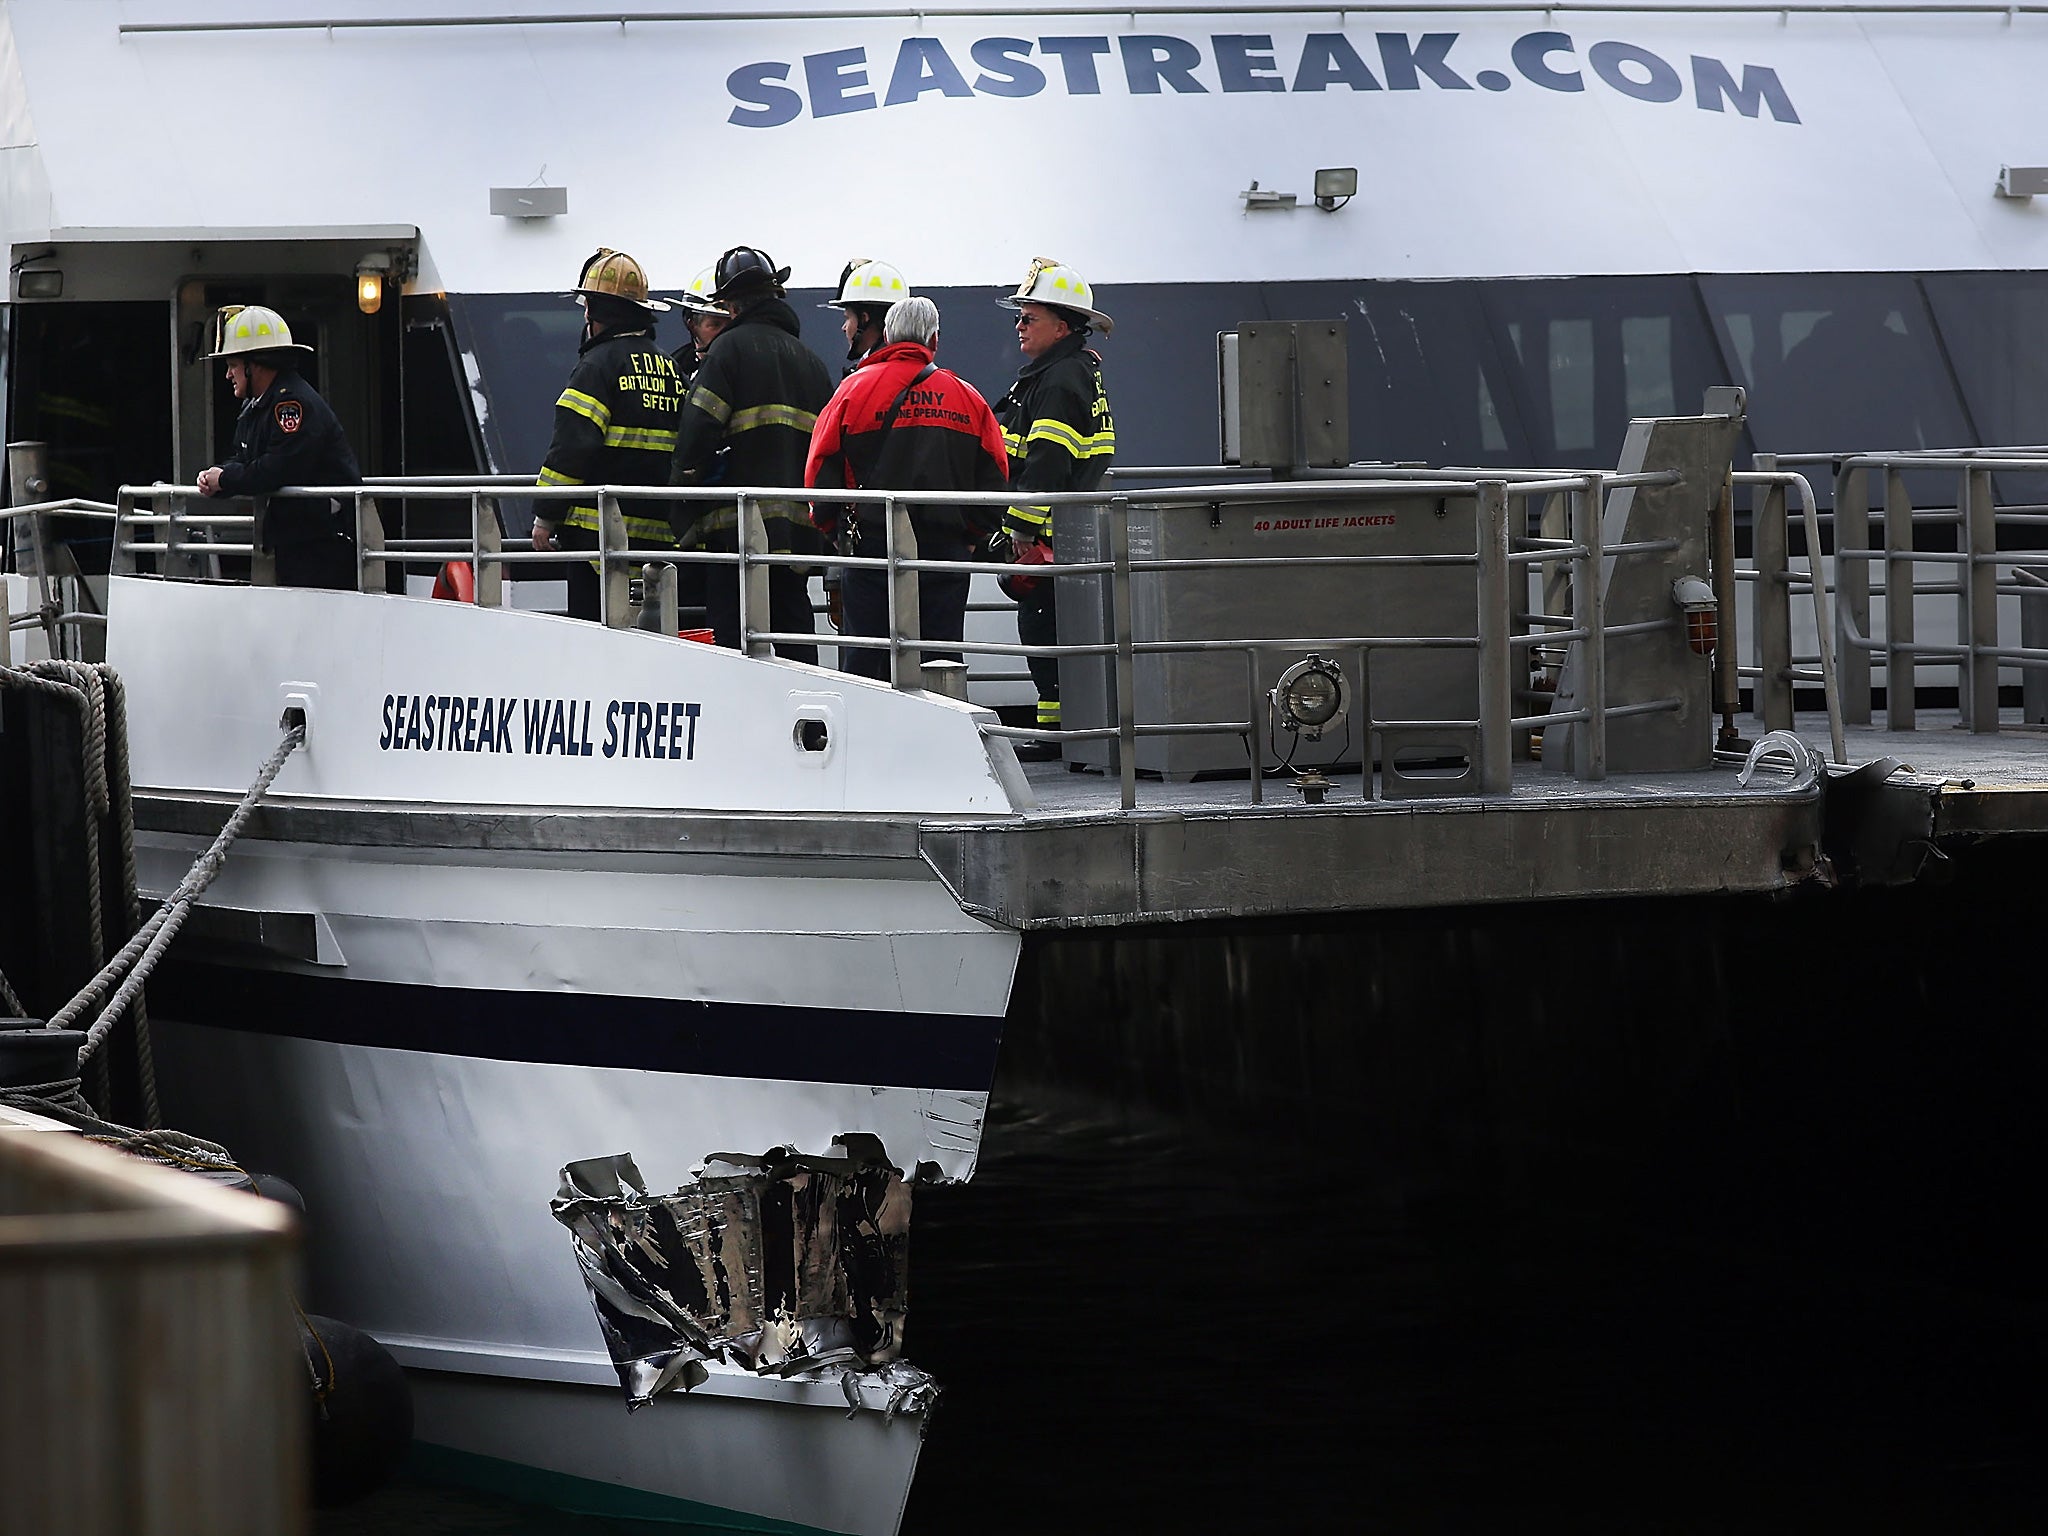 A gash in the Seastreak ferry after an early morning accident during rush hour in Lower Manhattan